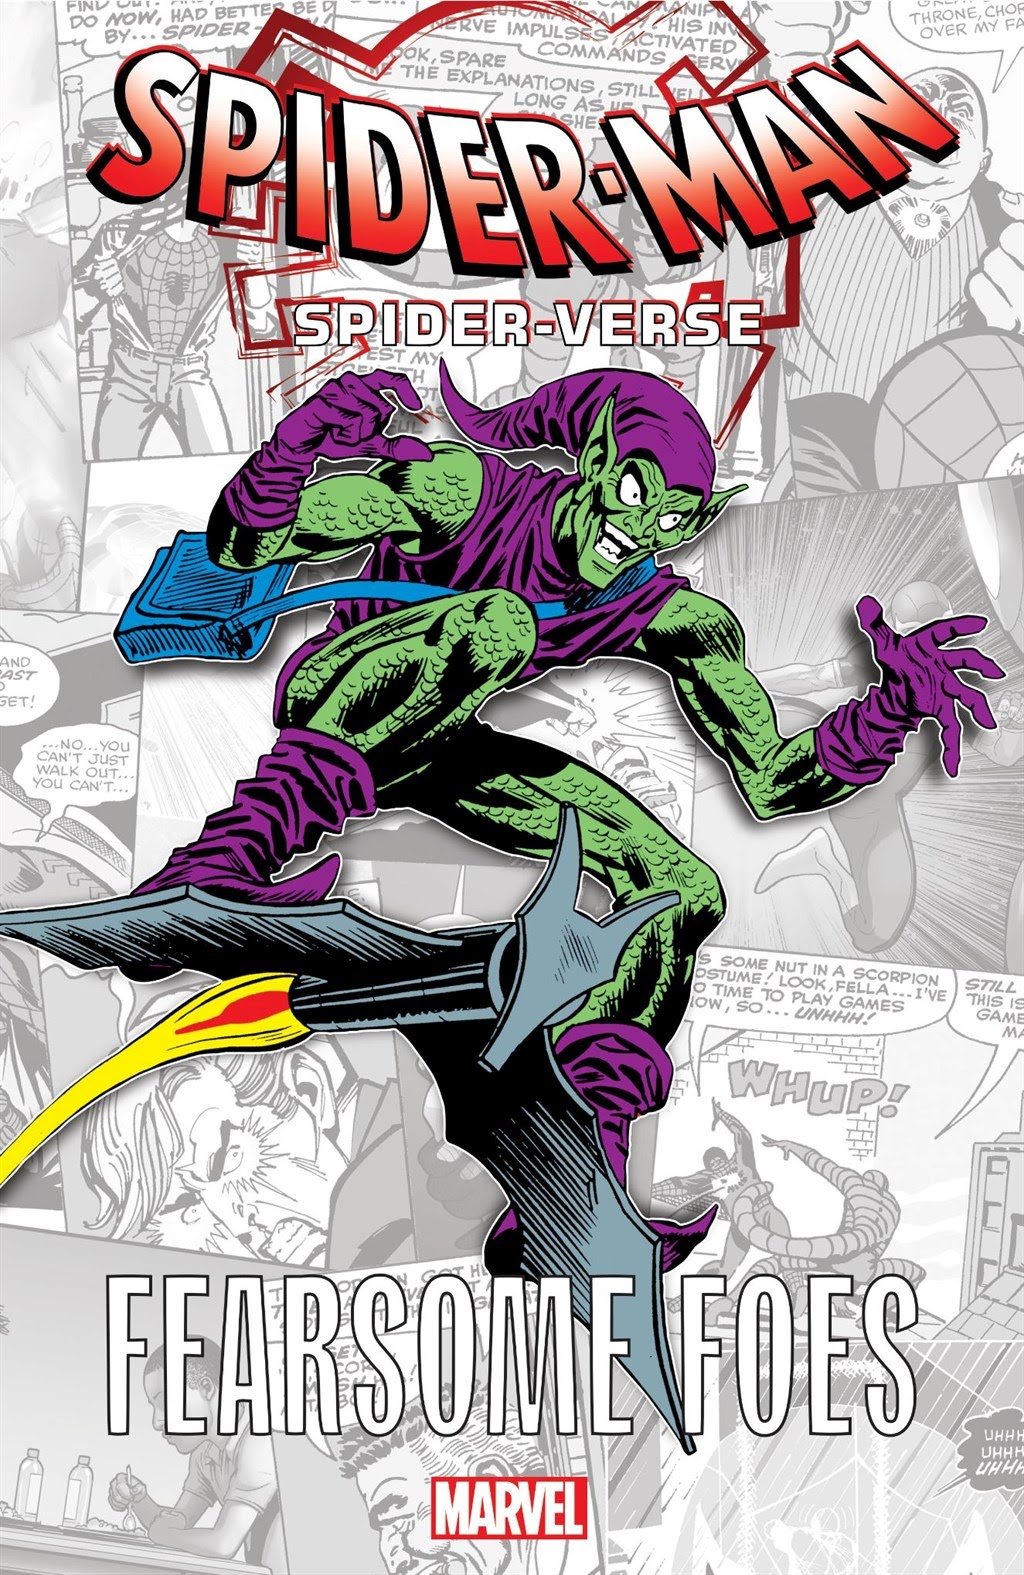 Read online Spider-Man: Spider-Verse comic -  Issue # Fearsome Foes - 1